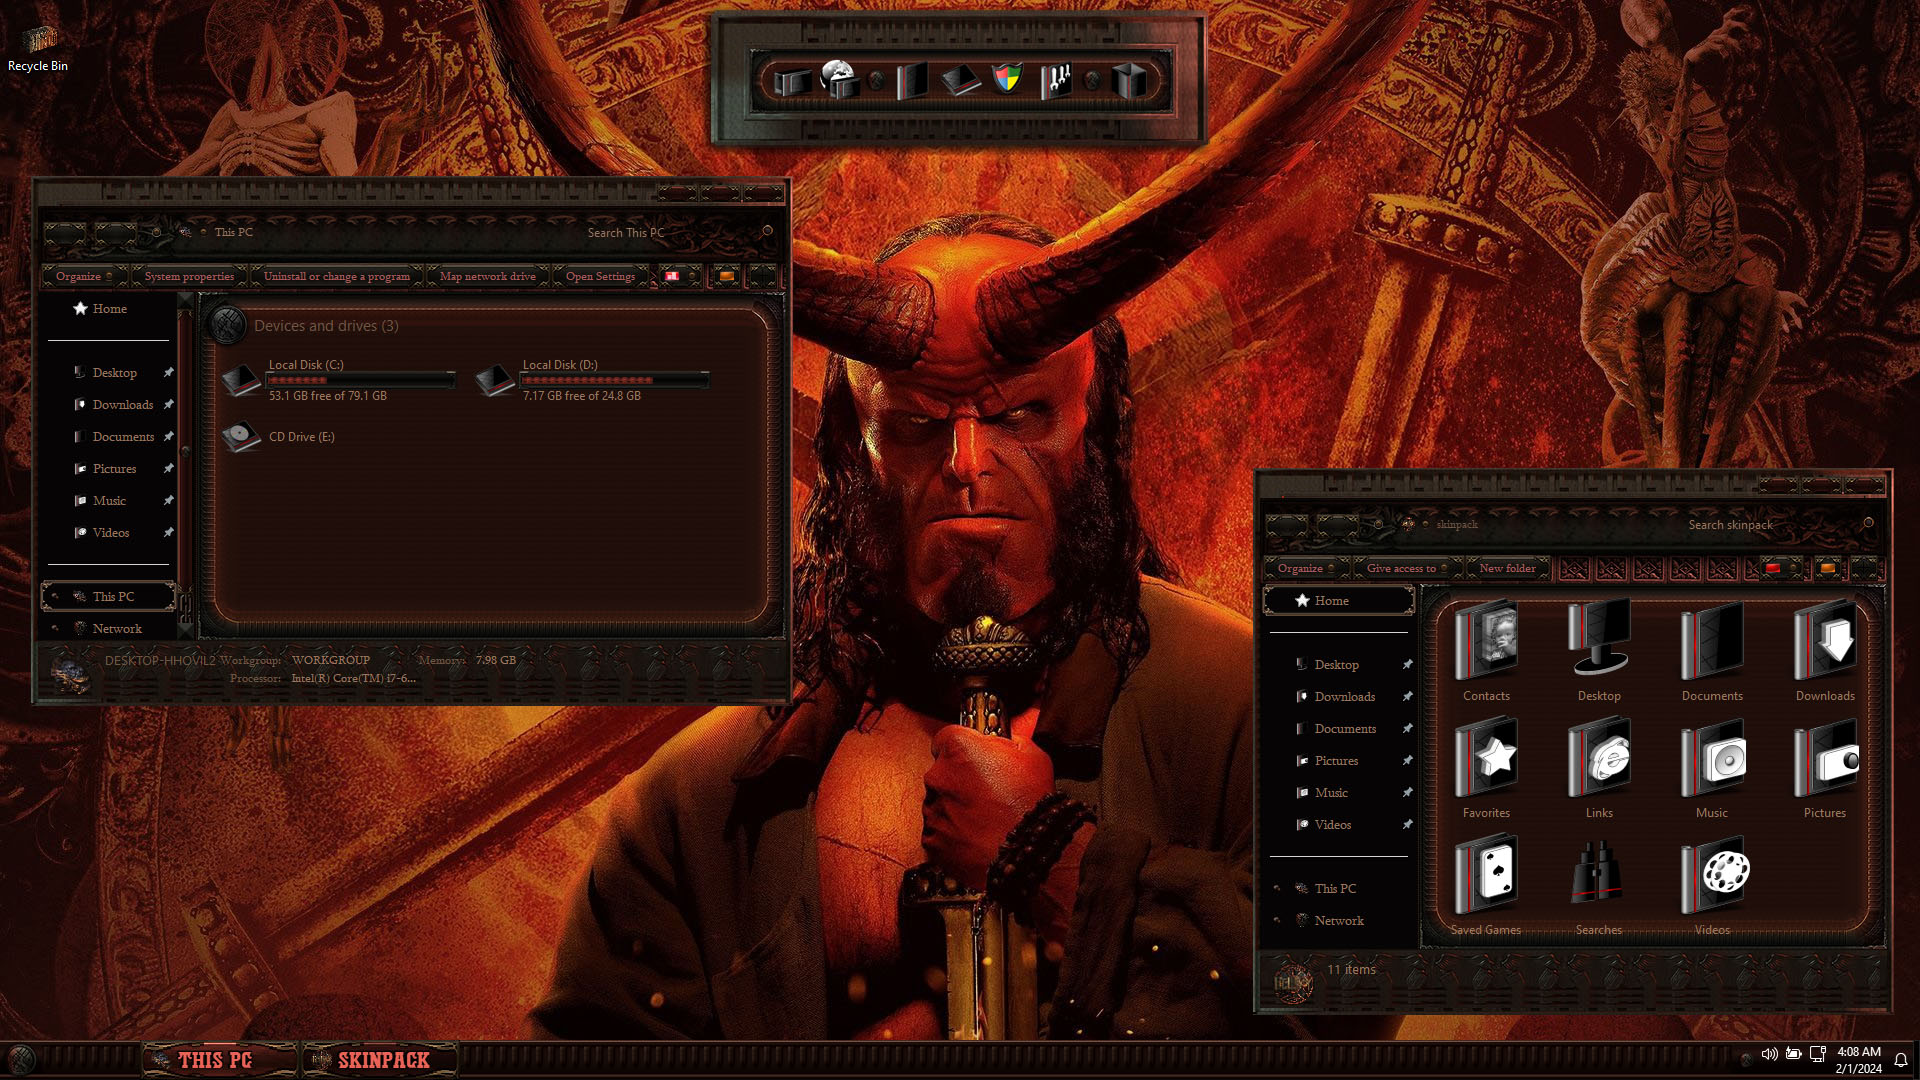 Hellboy Premium Skinpack For Windows 11 Skin Pack For Windows 11 And 10 4781